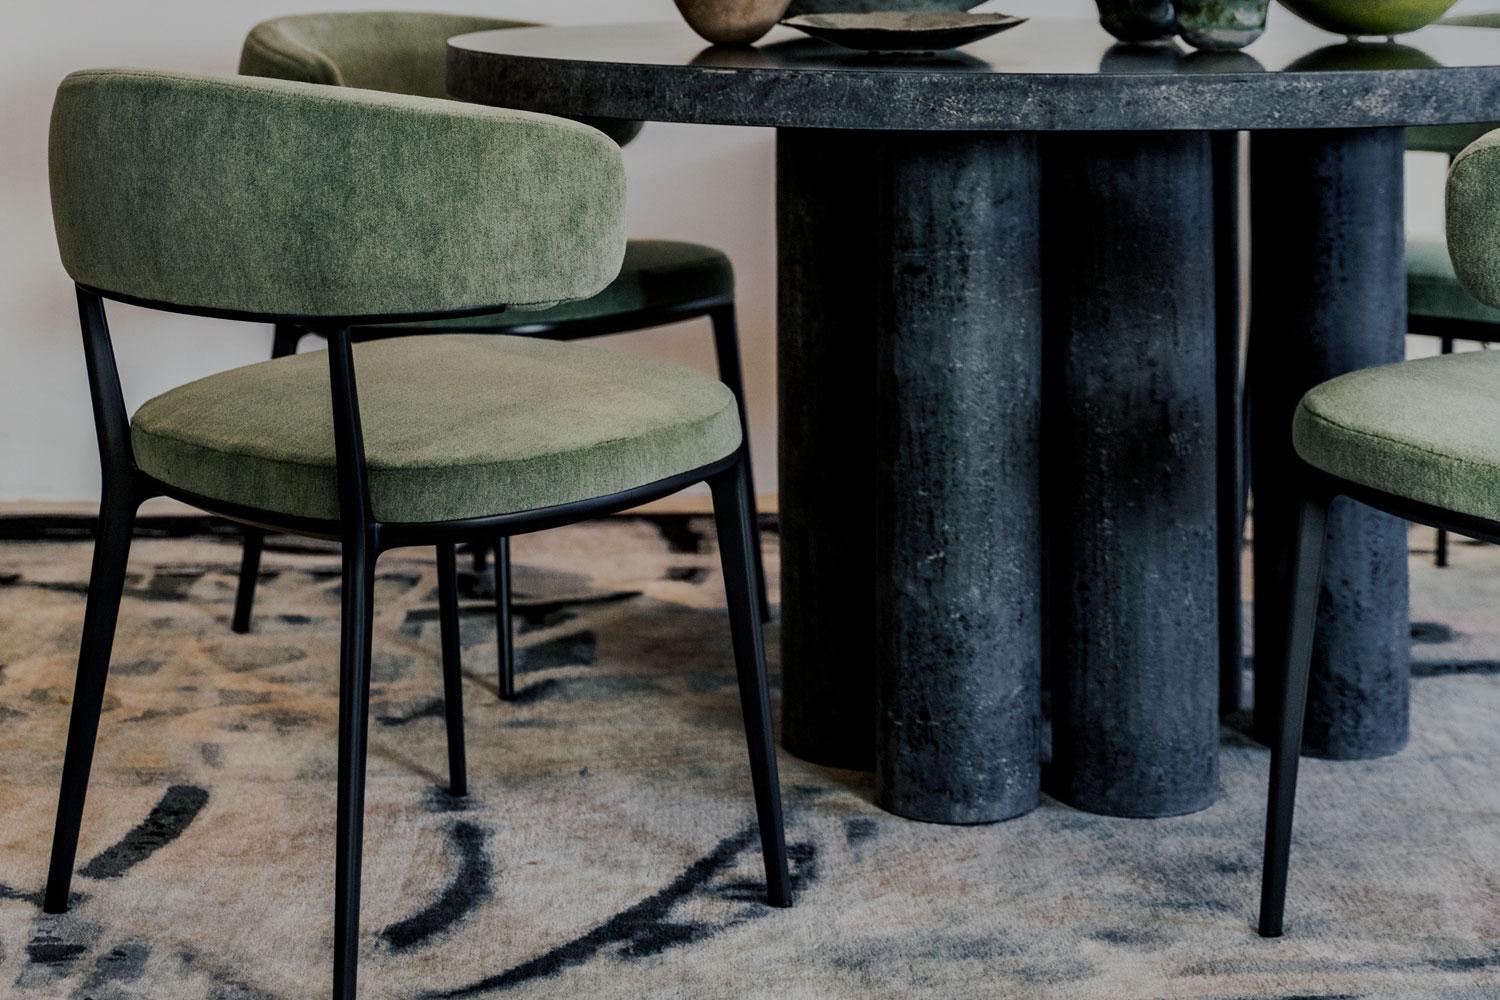 Italian Caratos Dining Chair in Sage-colored Velvet by Maxalto - Available Now